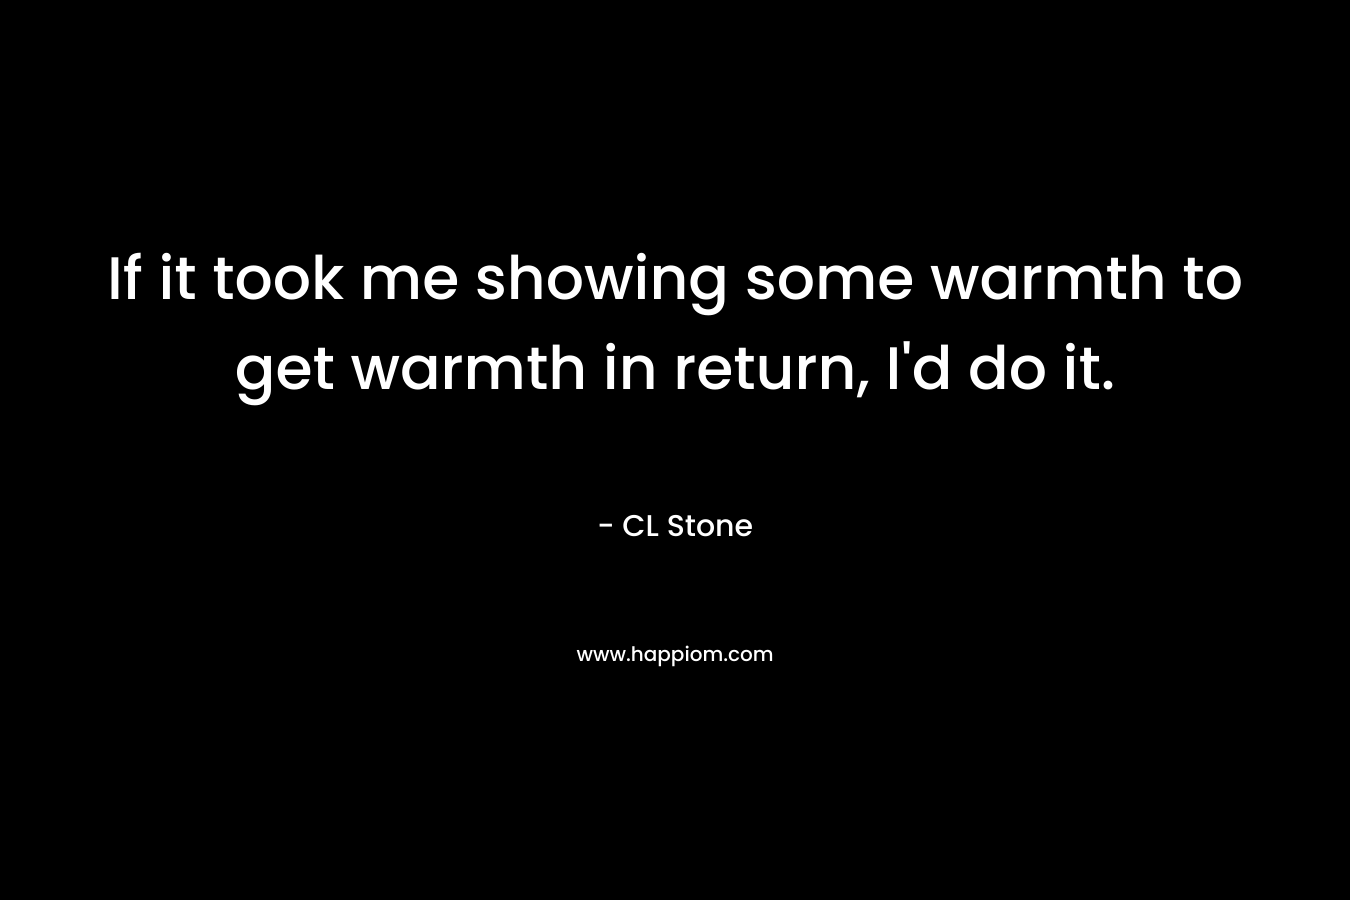 If it took me showing some warmth to get warmth in return, I’d do it. – CL Stone